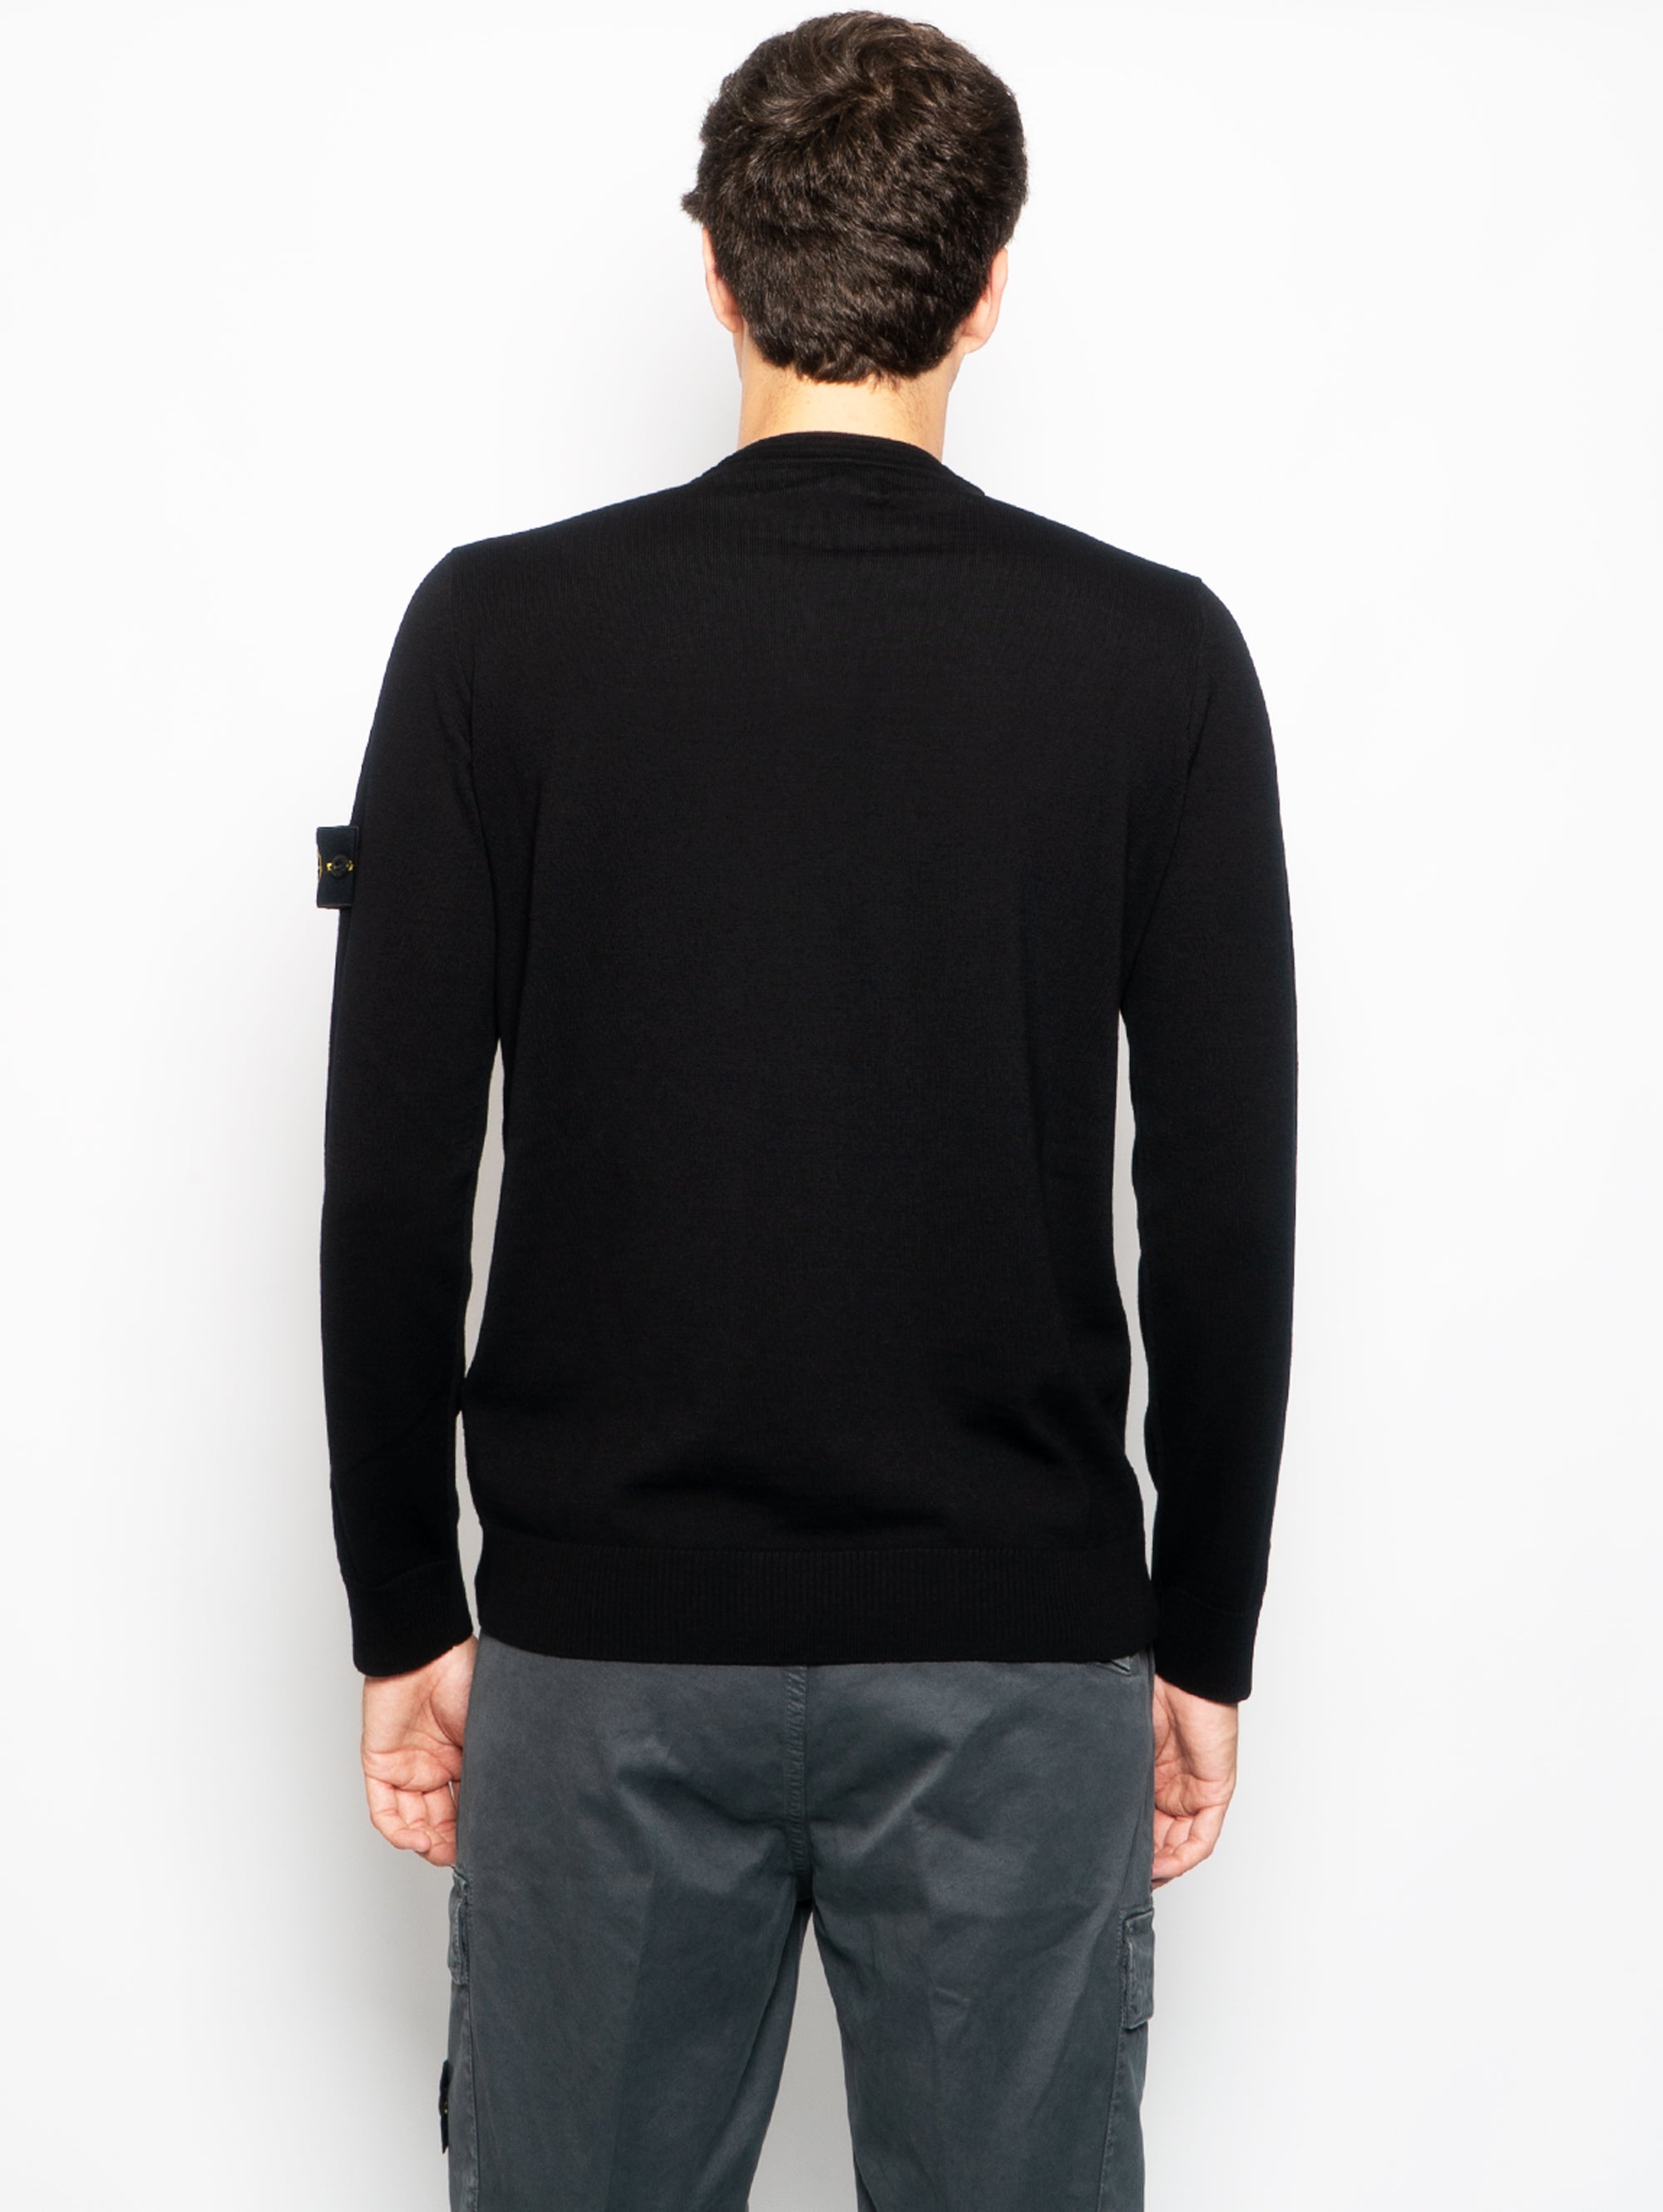 Black shaved wool sweater